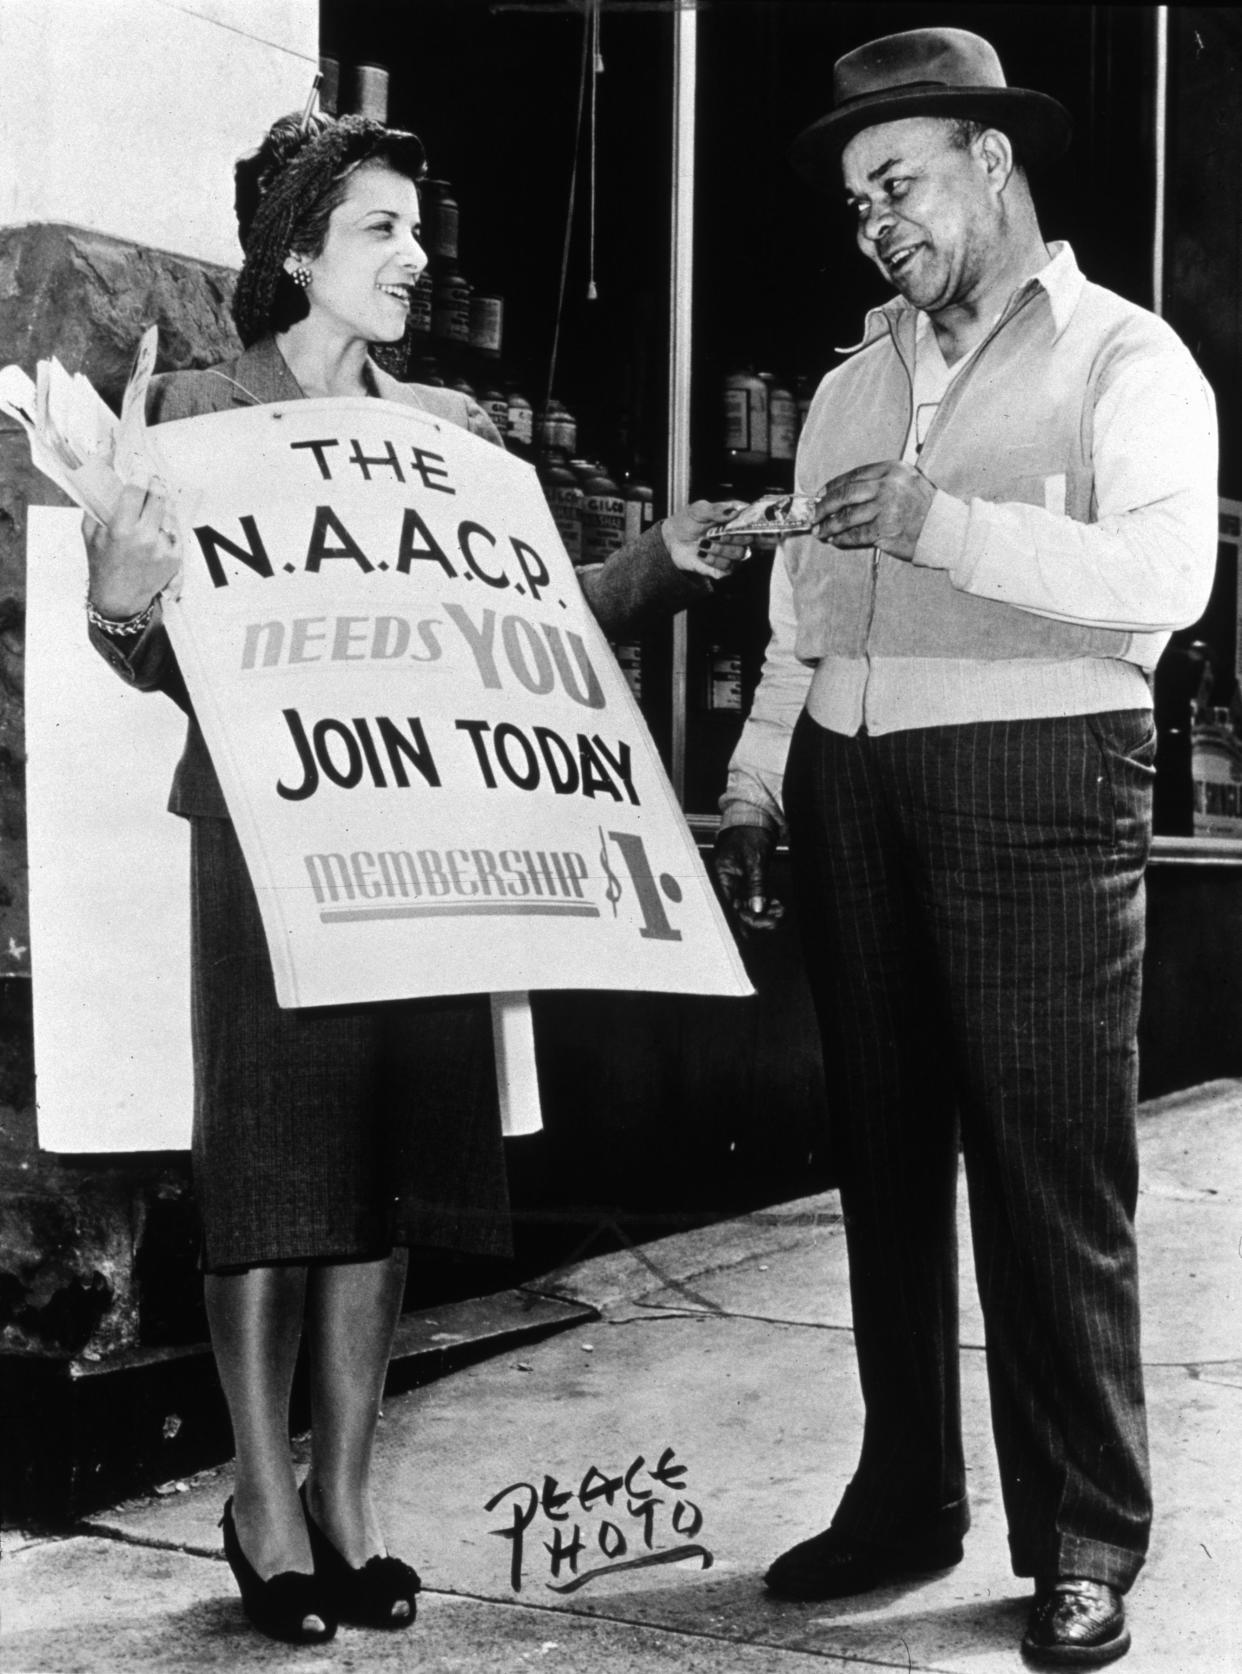 circa 1945: A women hands a flyer to a man looking to join the NAACP (National Association for the Advancement of Coloured People). The NAACP was founded in 1909 on Abraham Lincoln's birthday after a riot had broken out the year before in his home town of Springfield, Illinois.   (Photo by MPI/Getty Images)